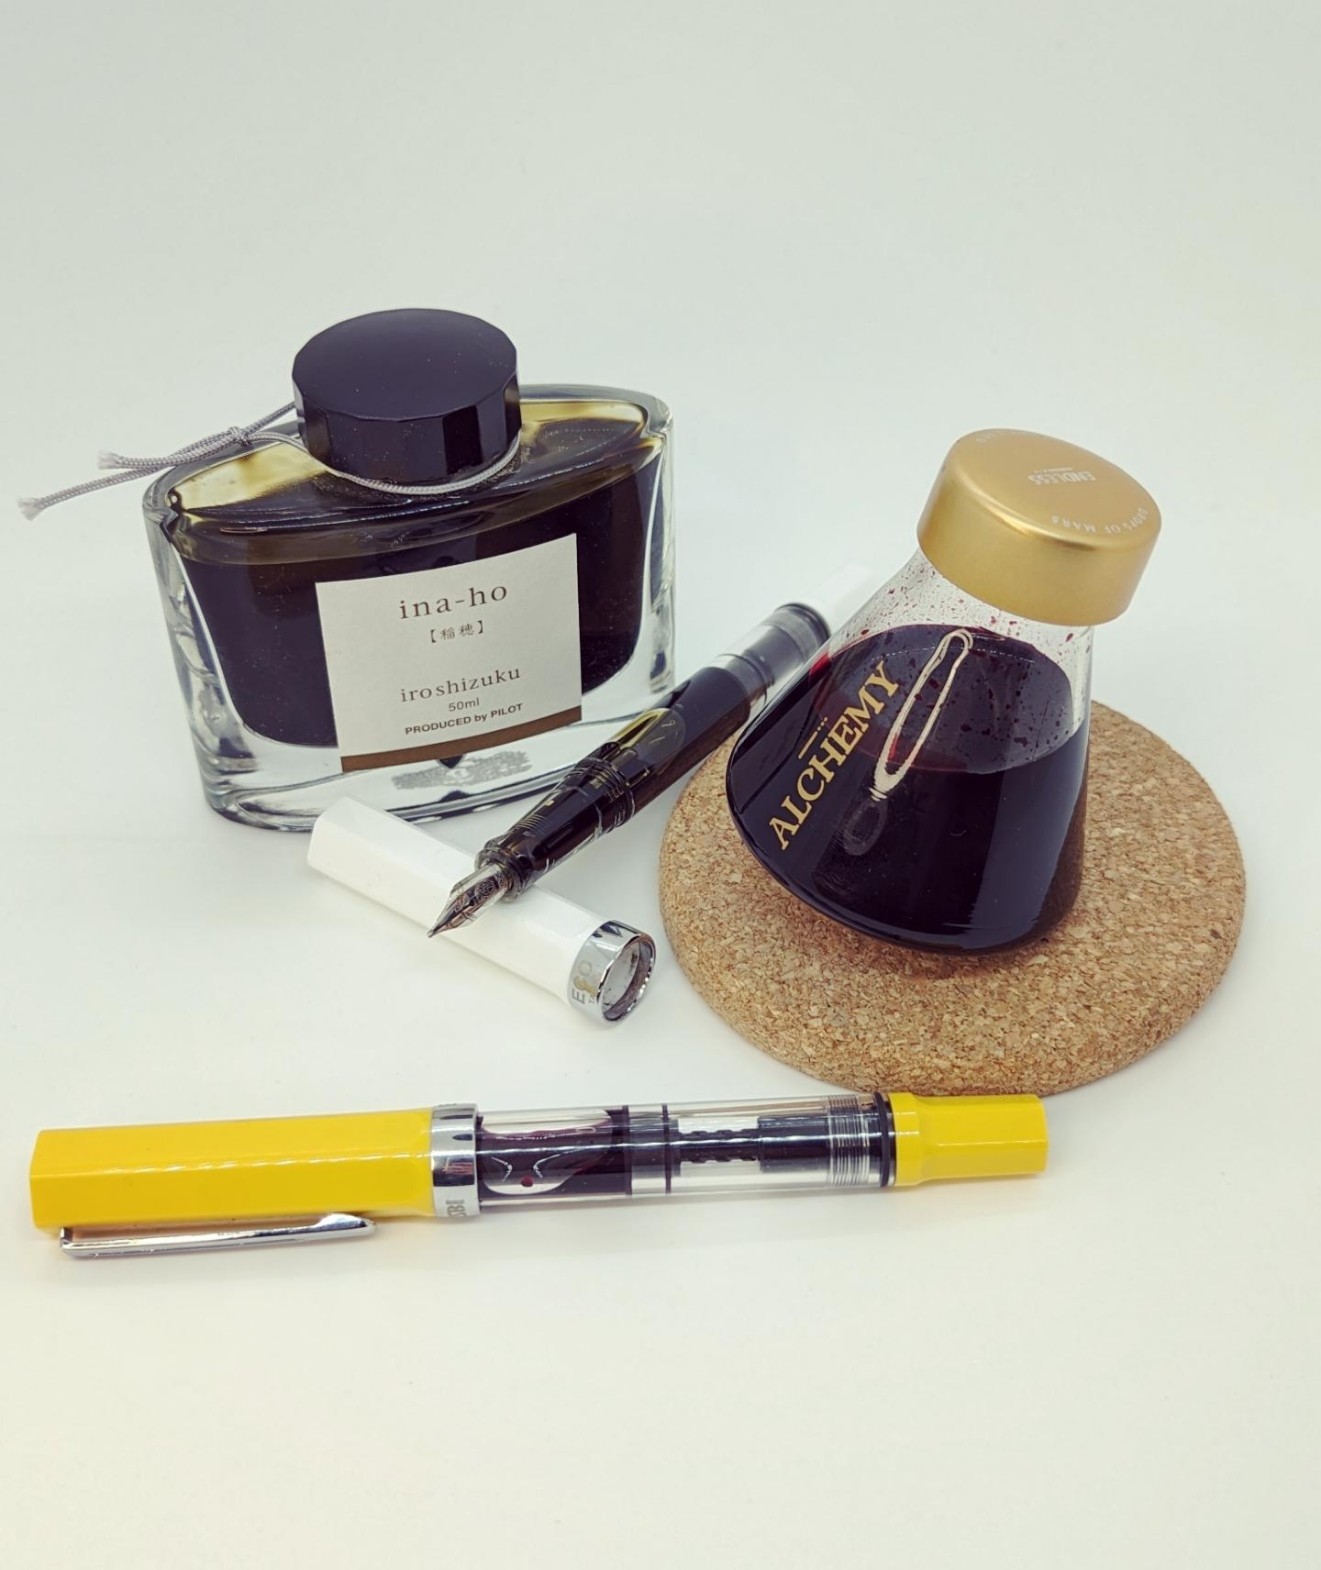 Fountain pens and ink bottles